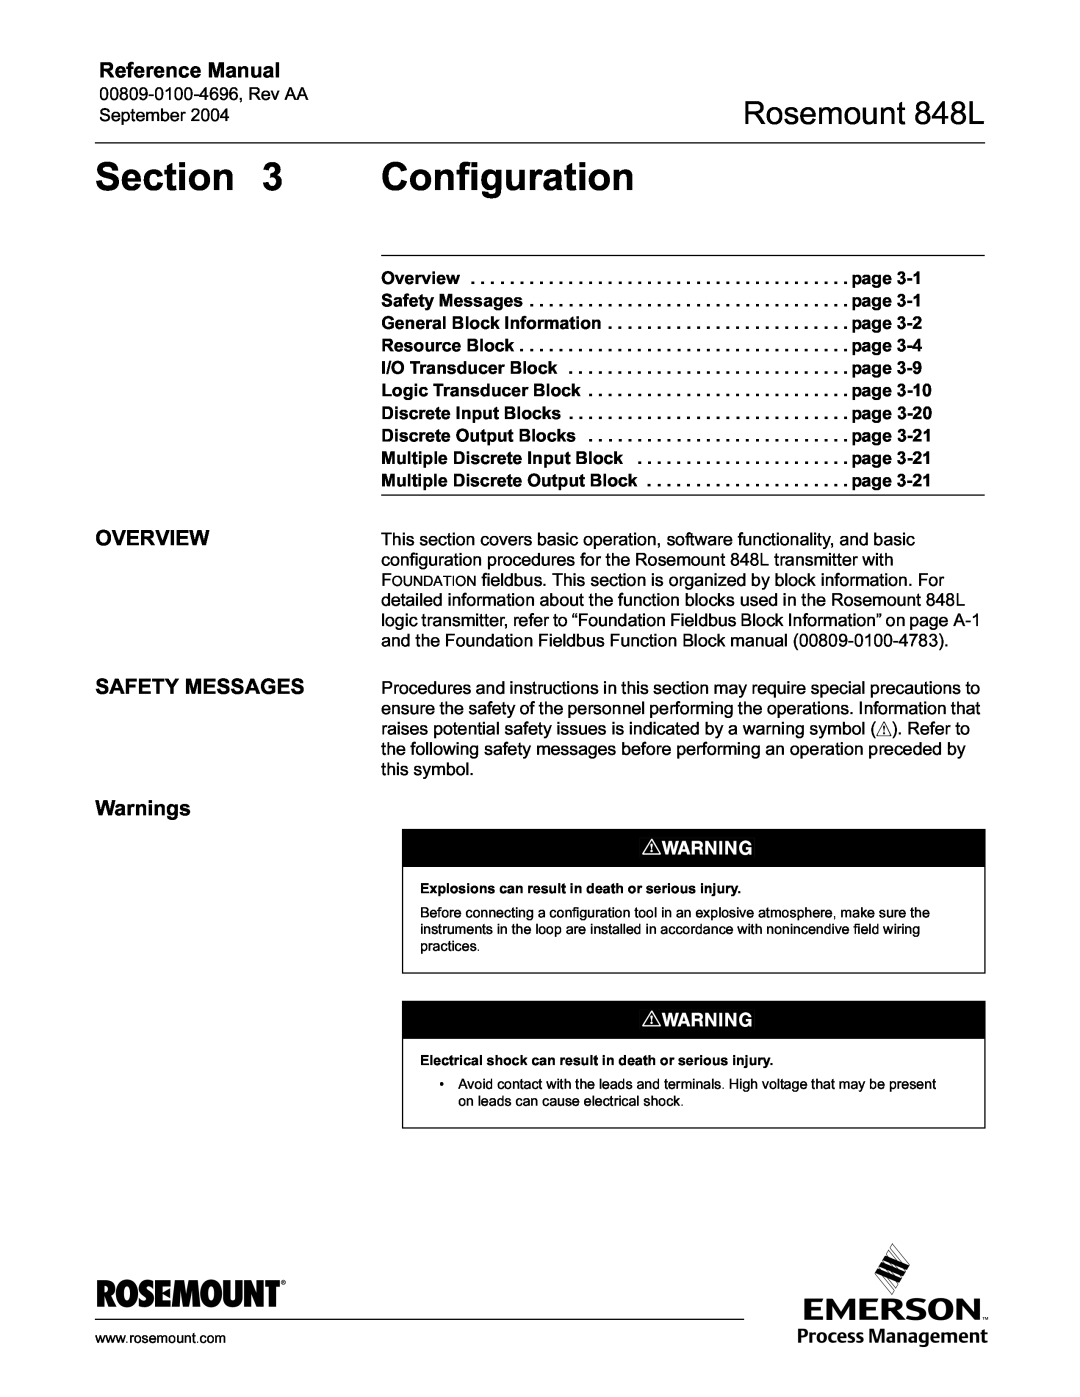 Emerson manual Configuration, OVERVIEW SAFETY MESSAGES Warnings, Section, Rosemount 848L, Reference Manual 